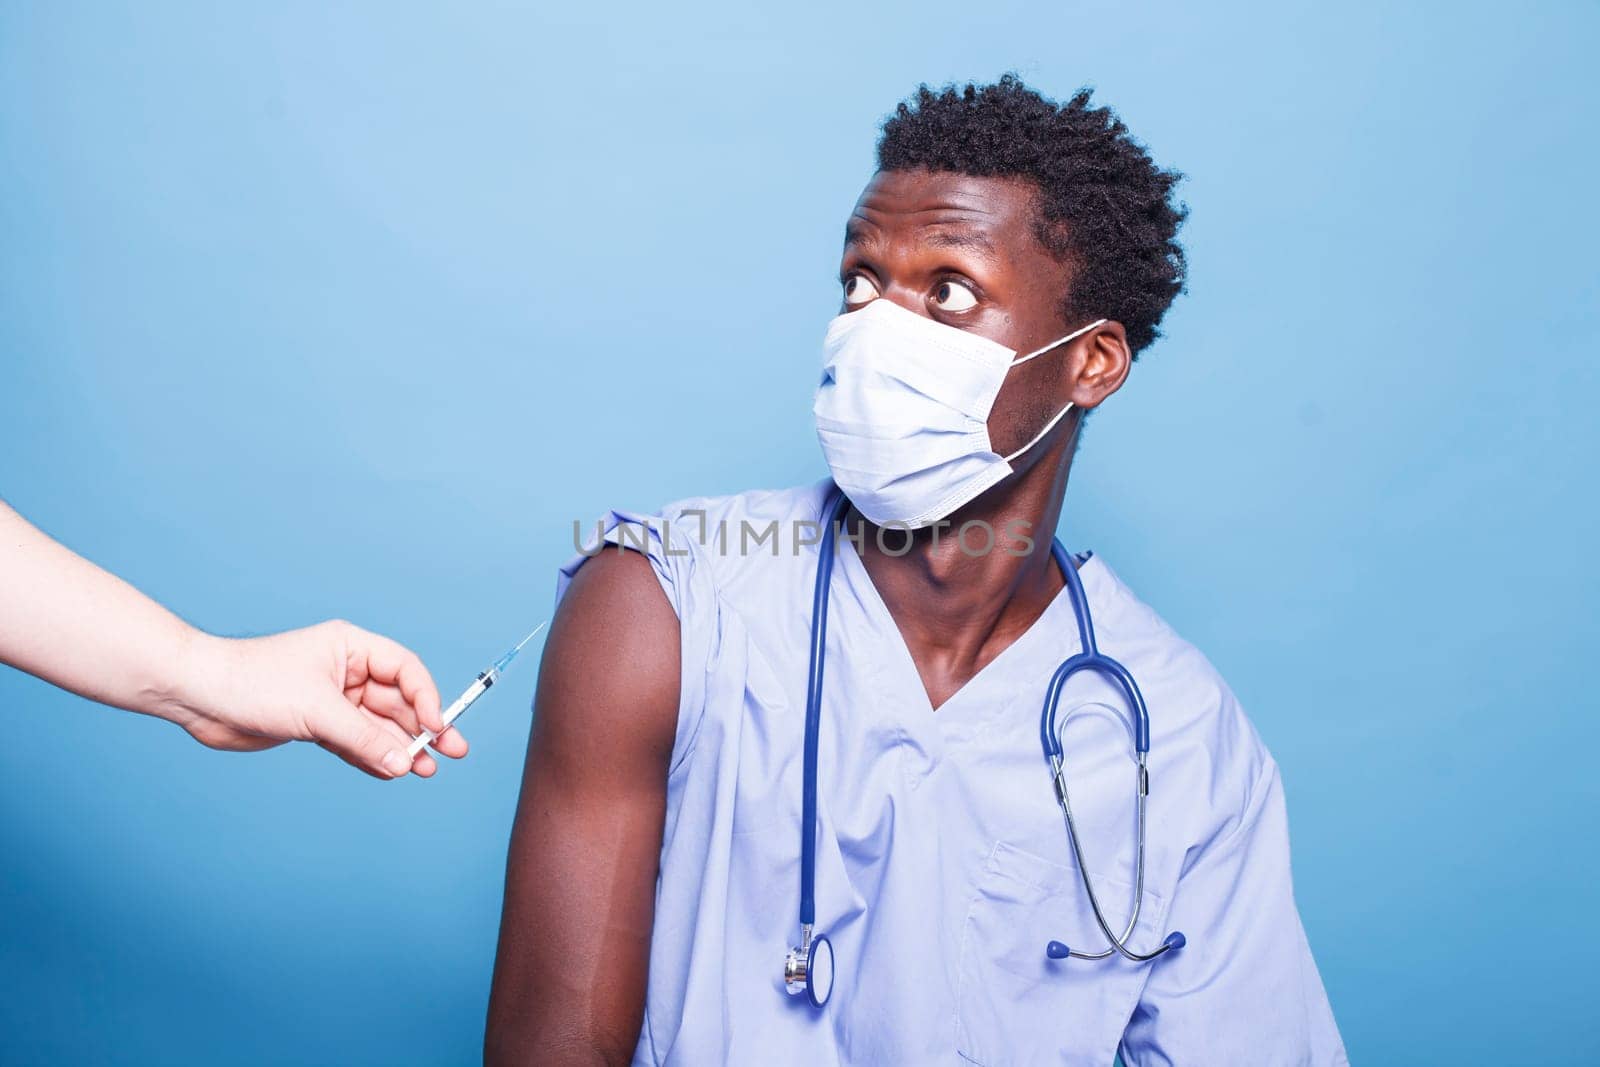 Image of medical nurse getting vaccinated by doctor in studio. Medic using syringe with needle for vaccine shot on arm of healthcare assistant. Specialist receiving vaccination against coronavirus.